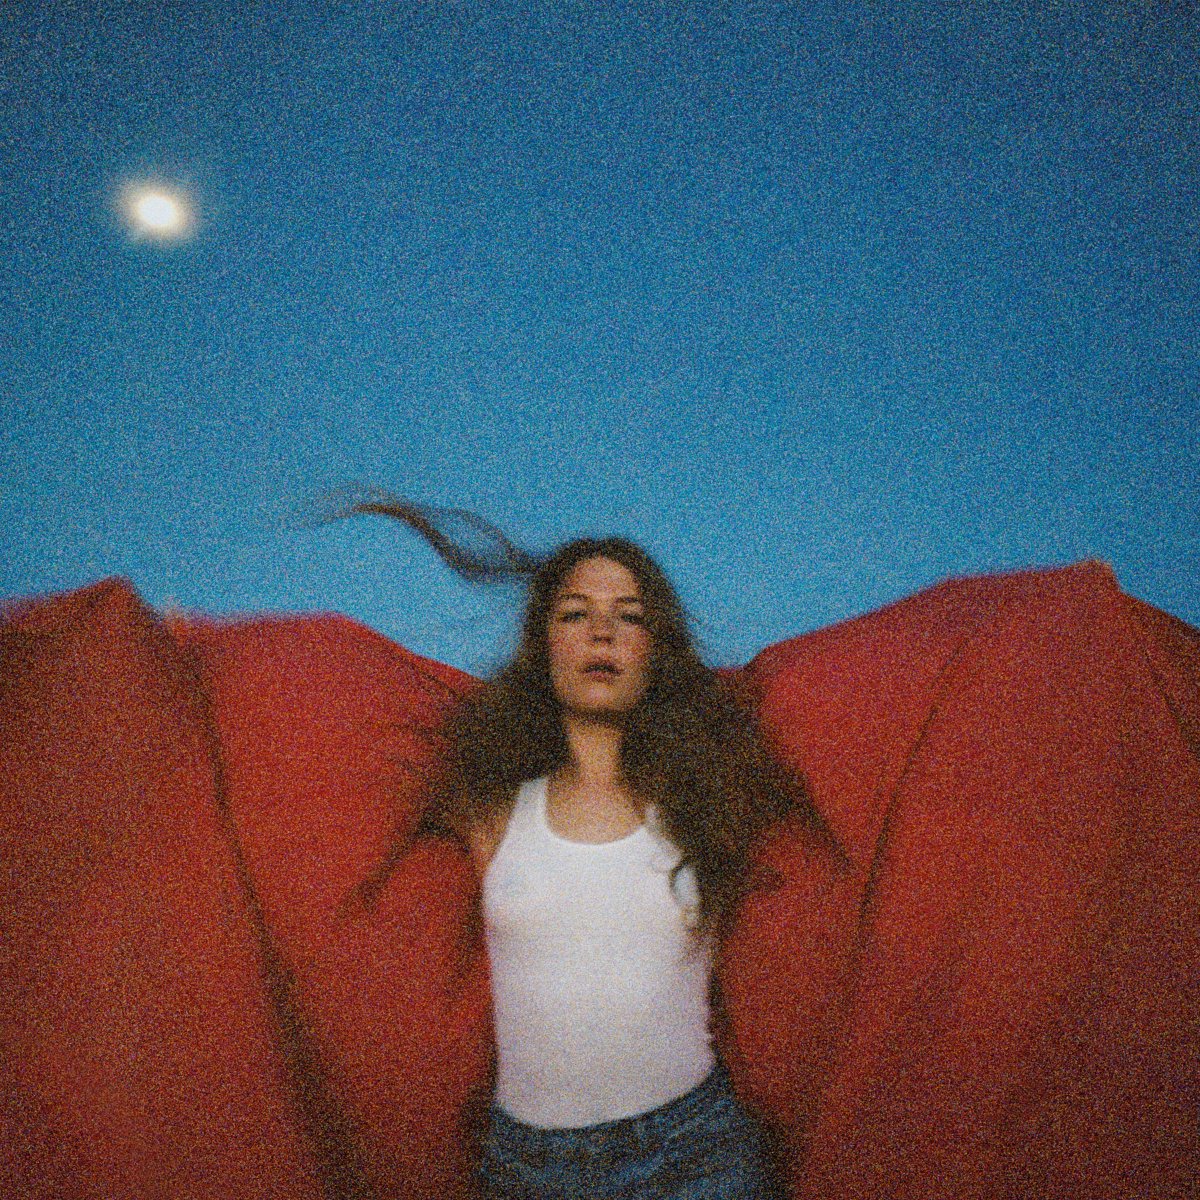 Review: “Heard It In A Past Life” by Maggie Rogers